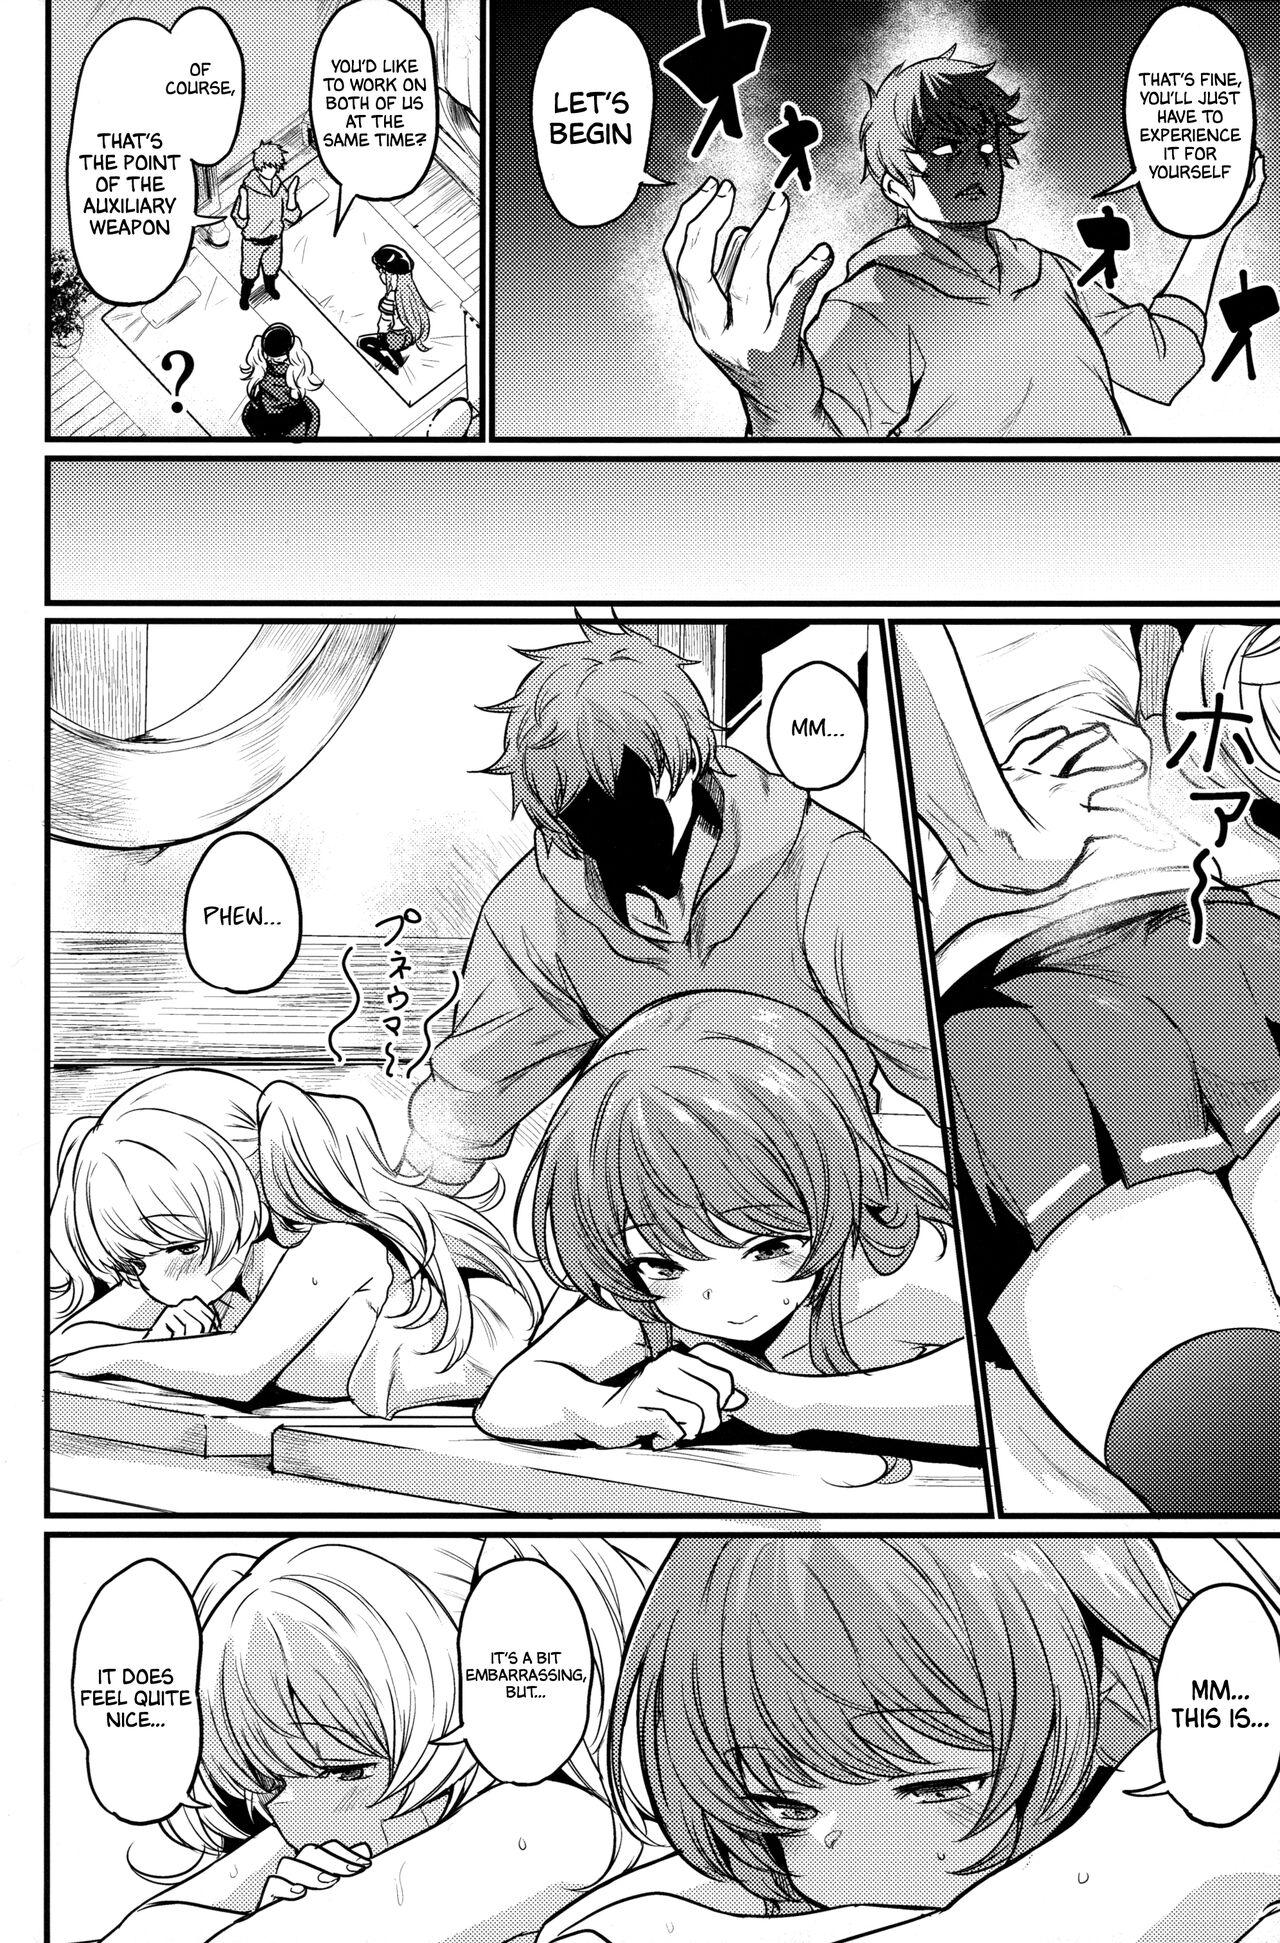 Pussy To Mouth Chitsujo Hustle! - Granblue fantasy Amatures Gone Wild - Page 3